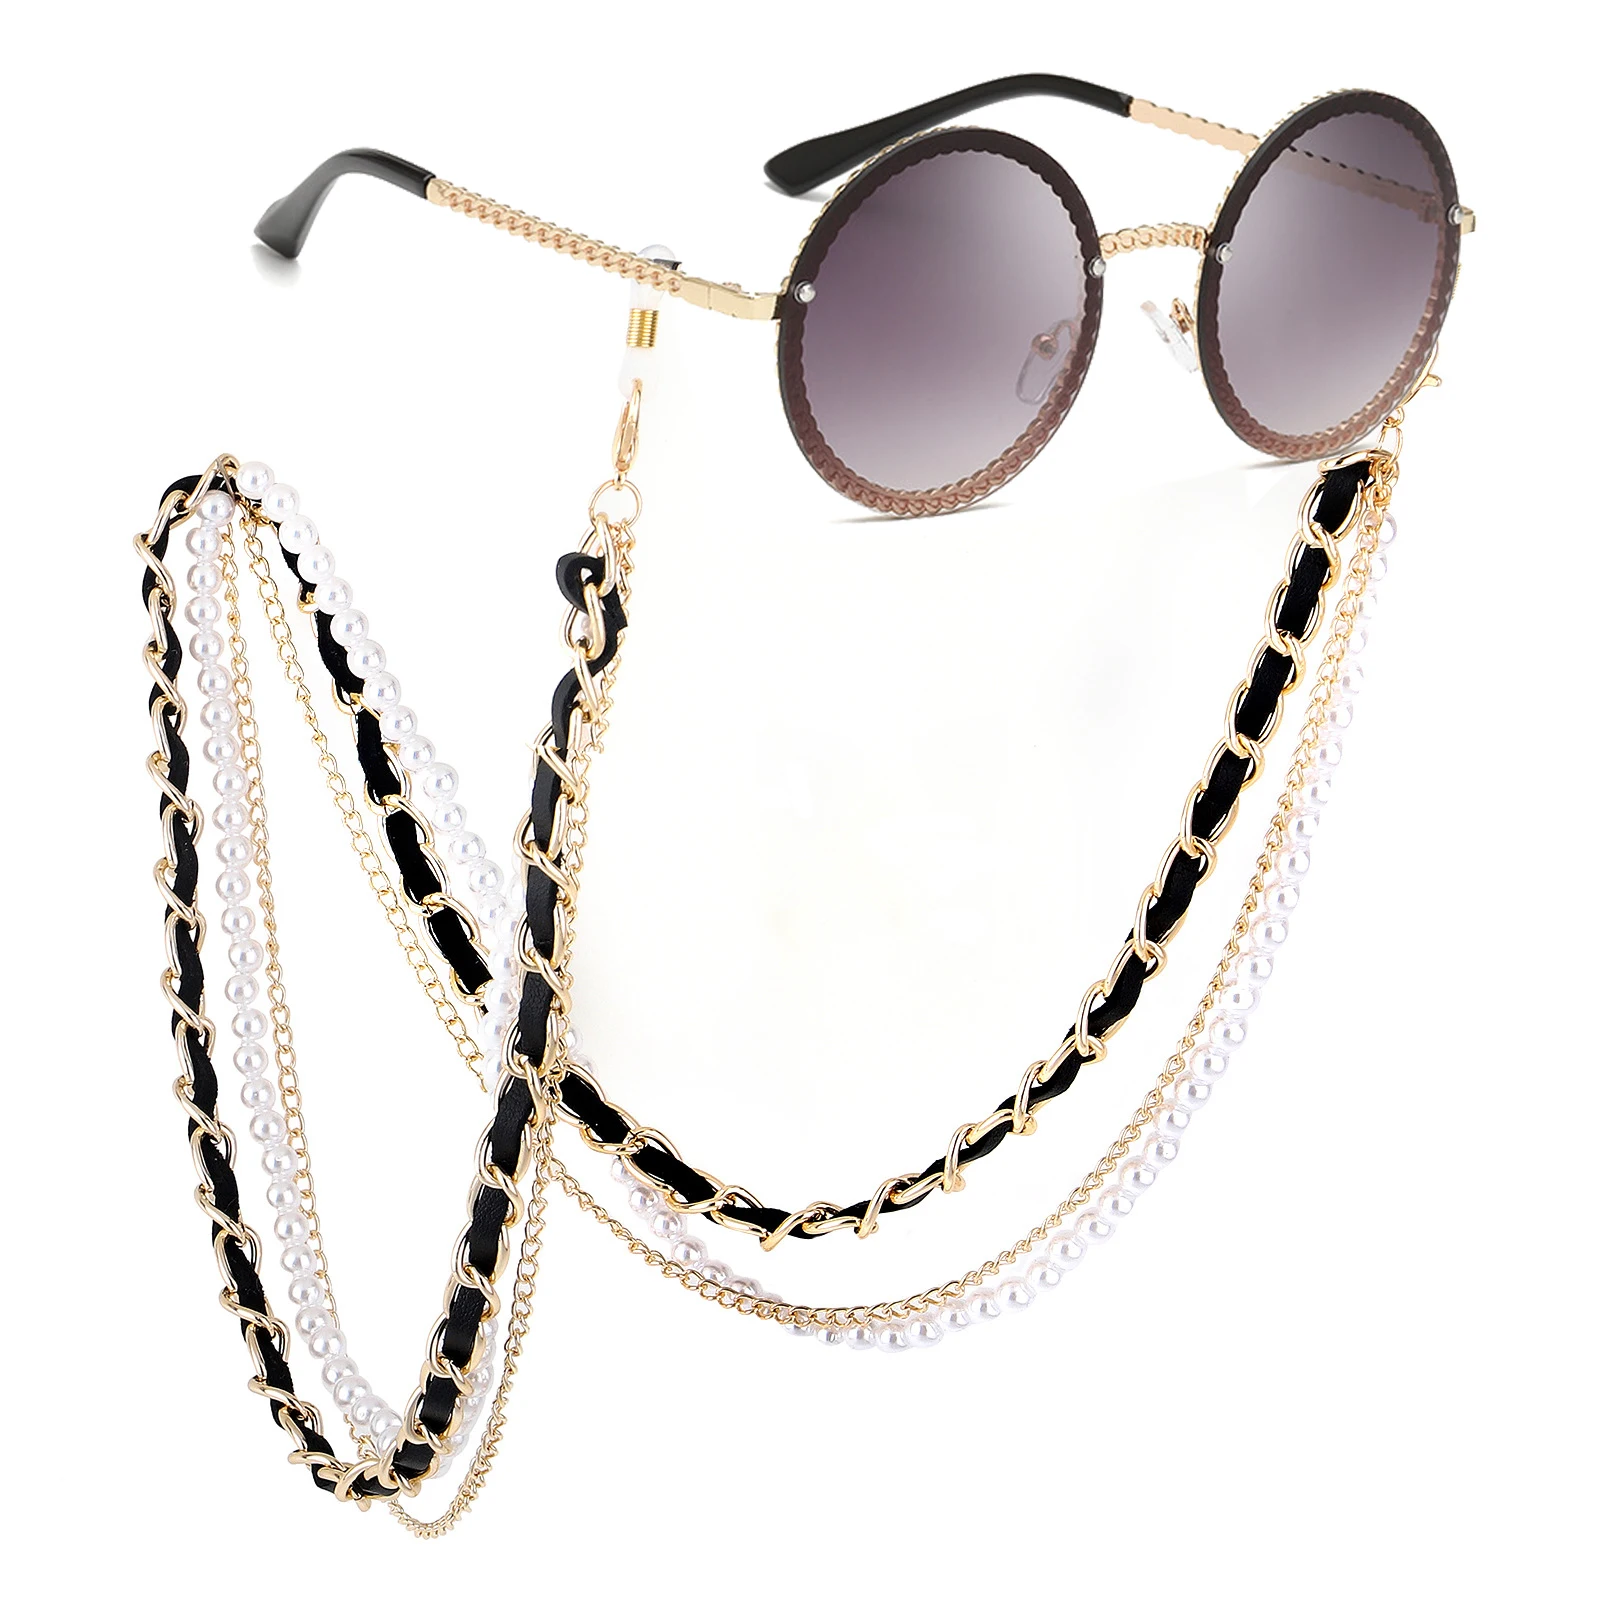 1Pcs New Arrival Fashion Pearl Leather Glasses Chain Trending